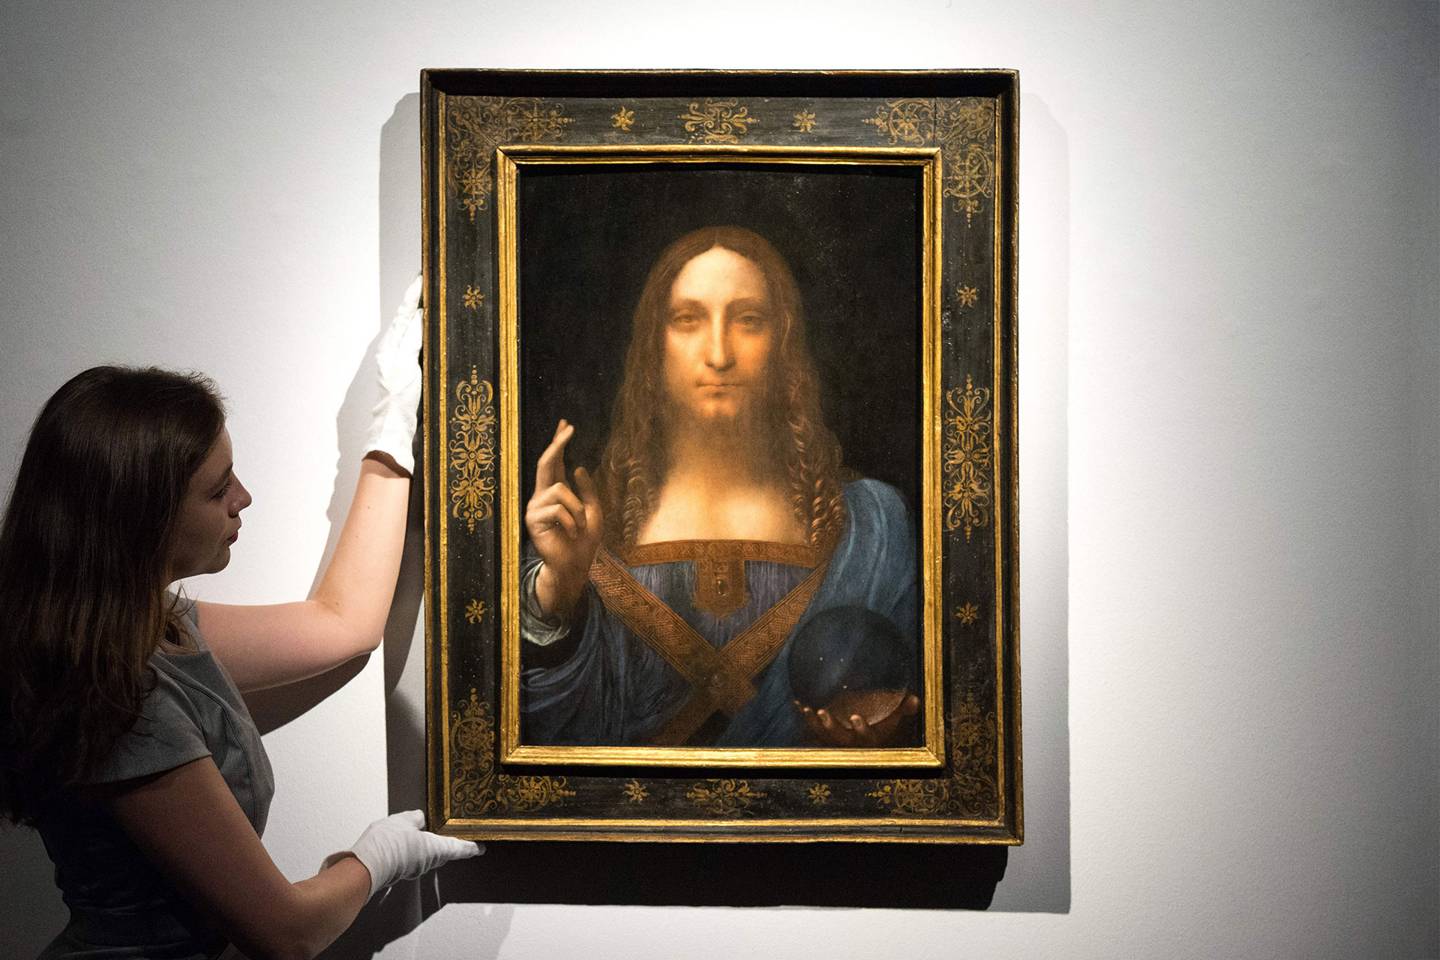 A new documentary on ‘Salvator Mundi’ alleges political discord over